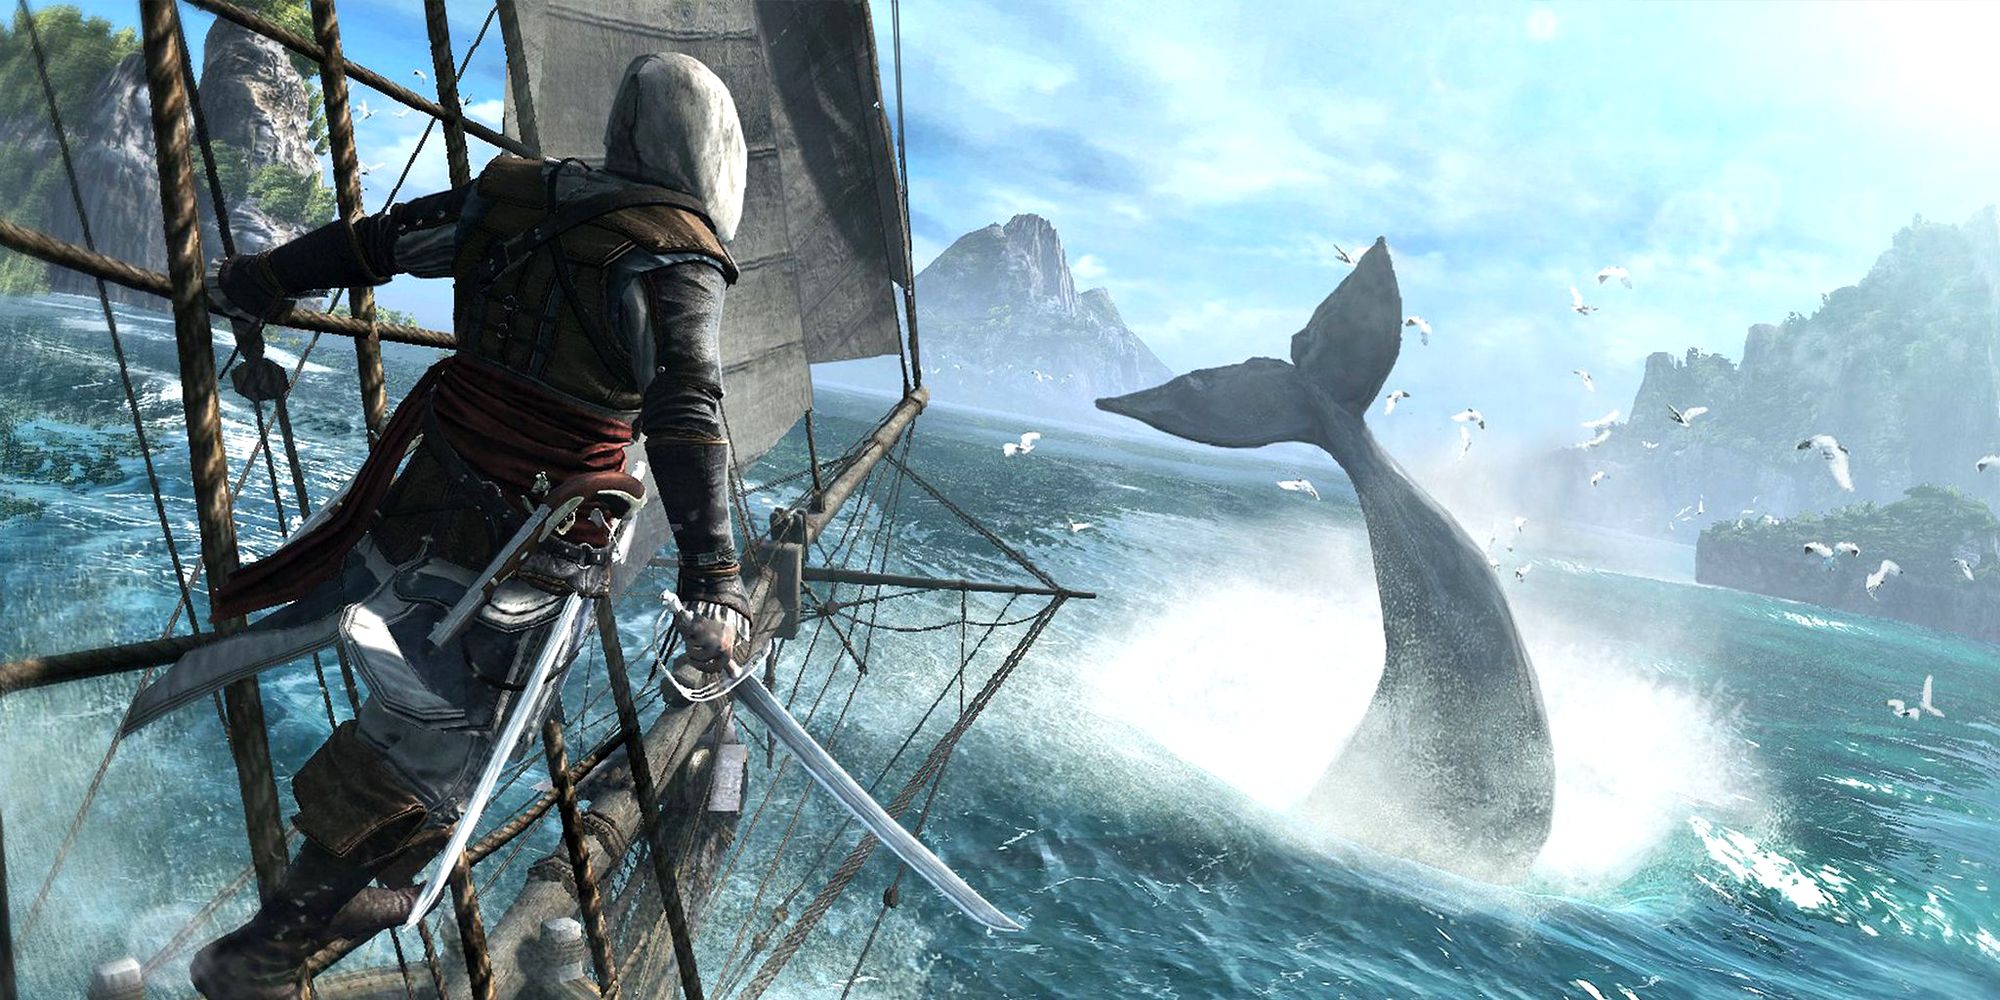 Assassin's Creed IV Black Flag Edward Kenway witnessing whale dive